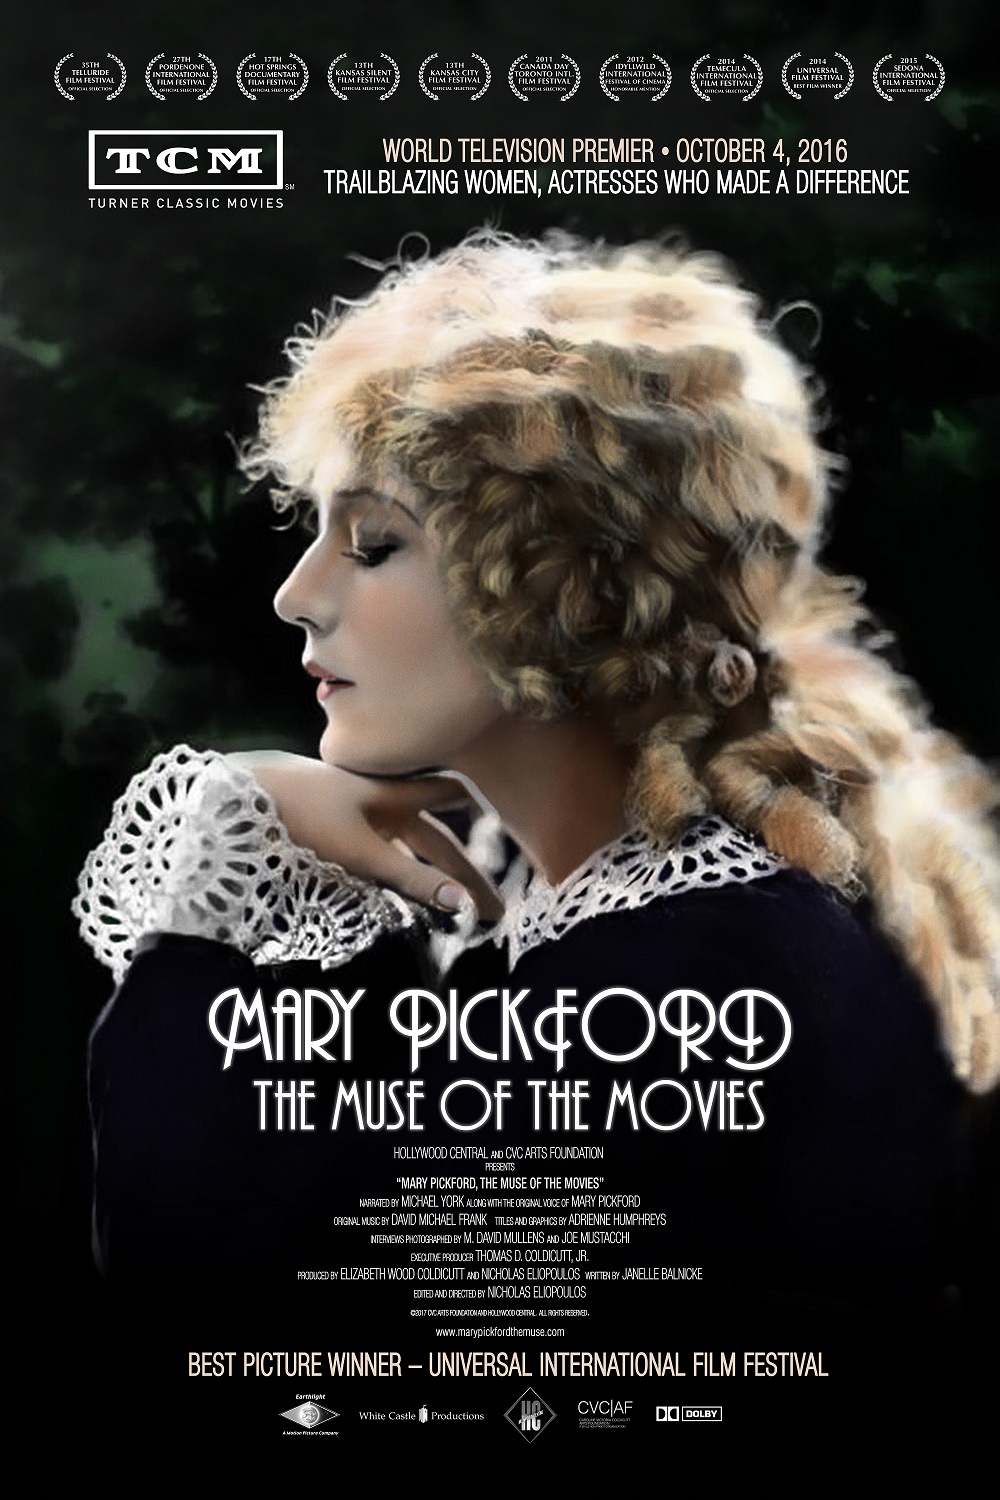 Mary Pickford: The Muse of the Movies (2008) Screenshot 4 